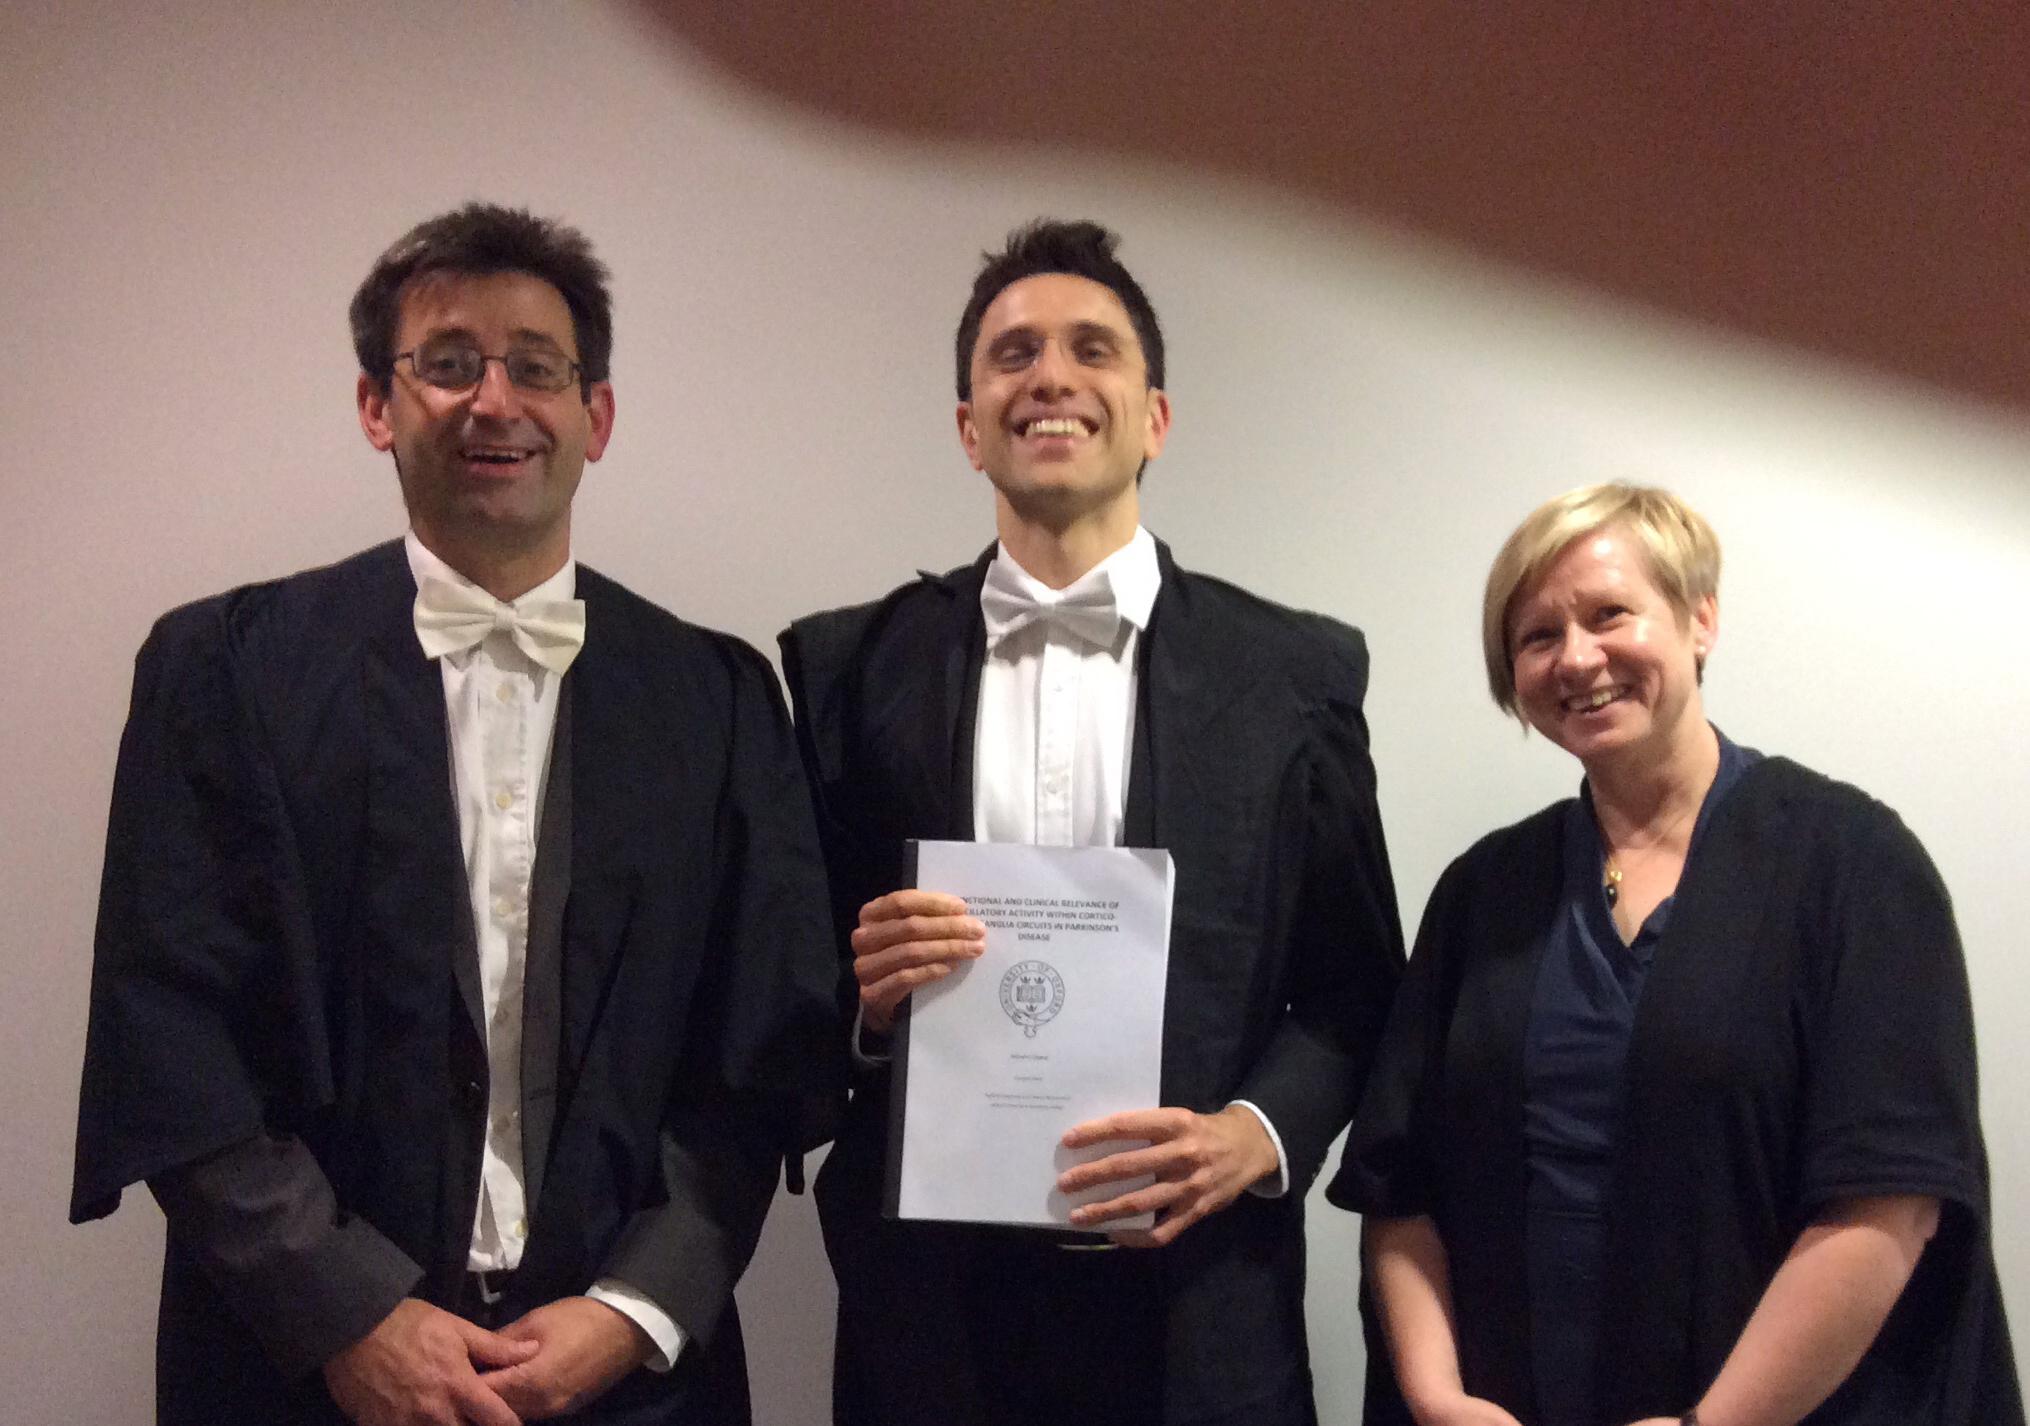 After the viva: the happy student (centre) and two satisfied Examiners.